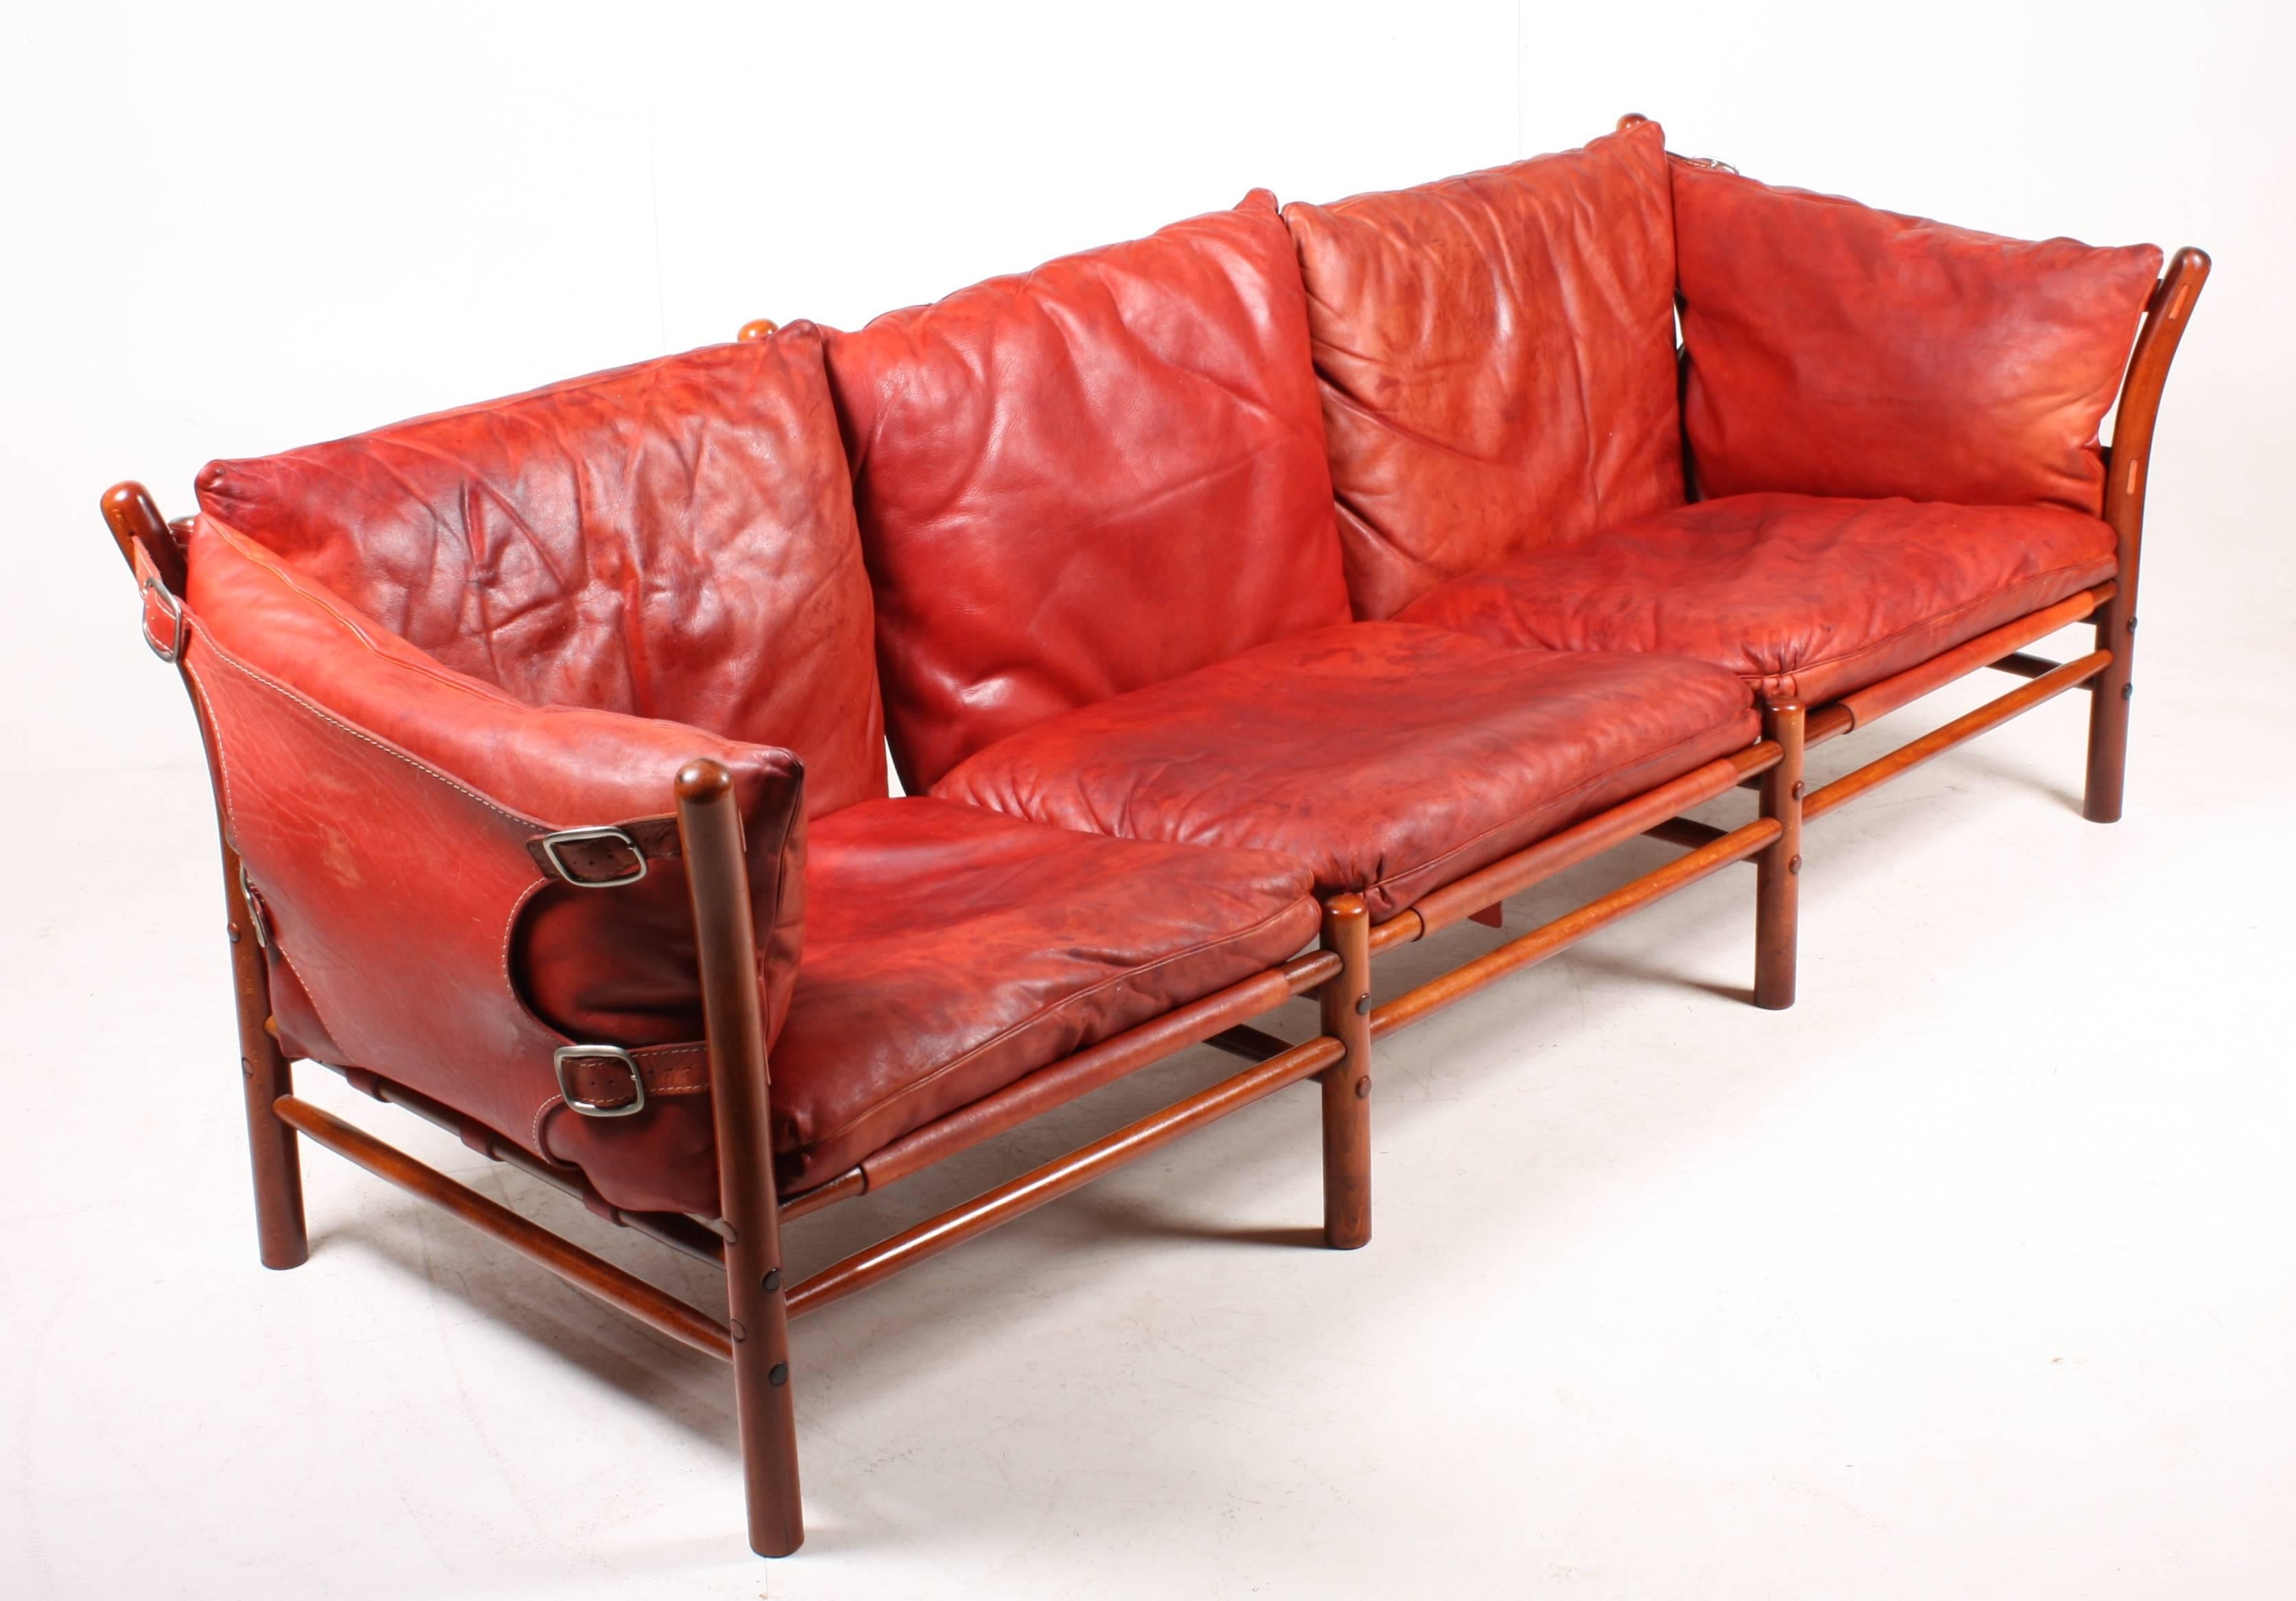 Three-seat sofa in beautiful patinated red leather, wood frame and brass hardware. Model Ilona designed by Swedish architect Arne Norell for Norell Möbel AB in the 1960s. Great original condition.